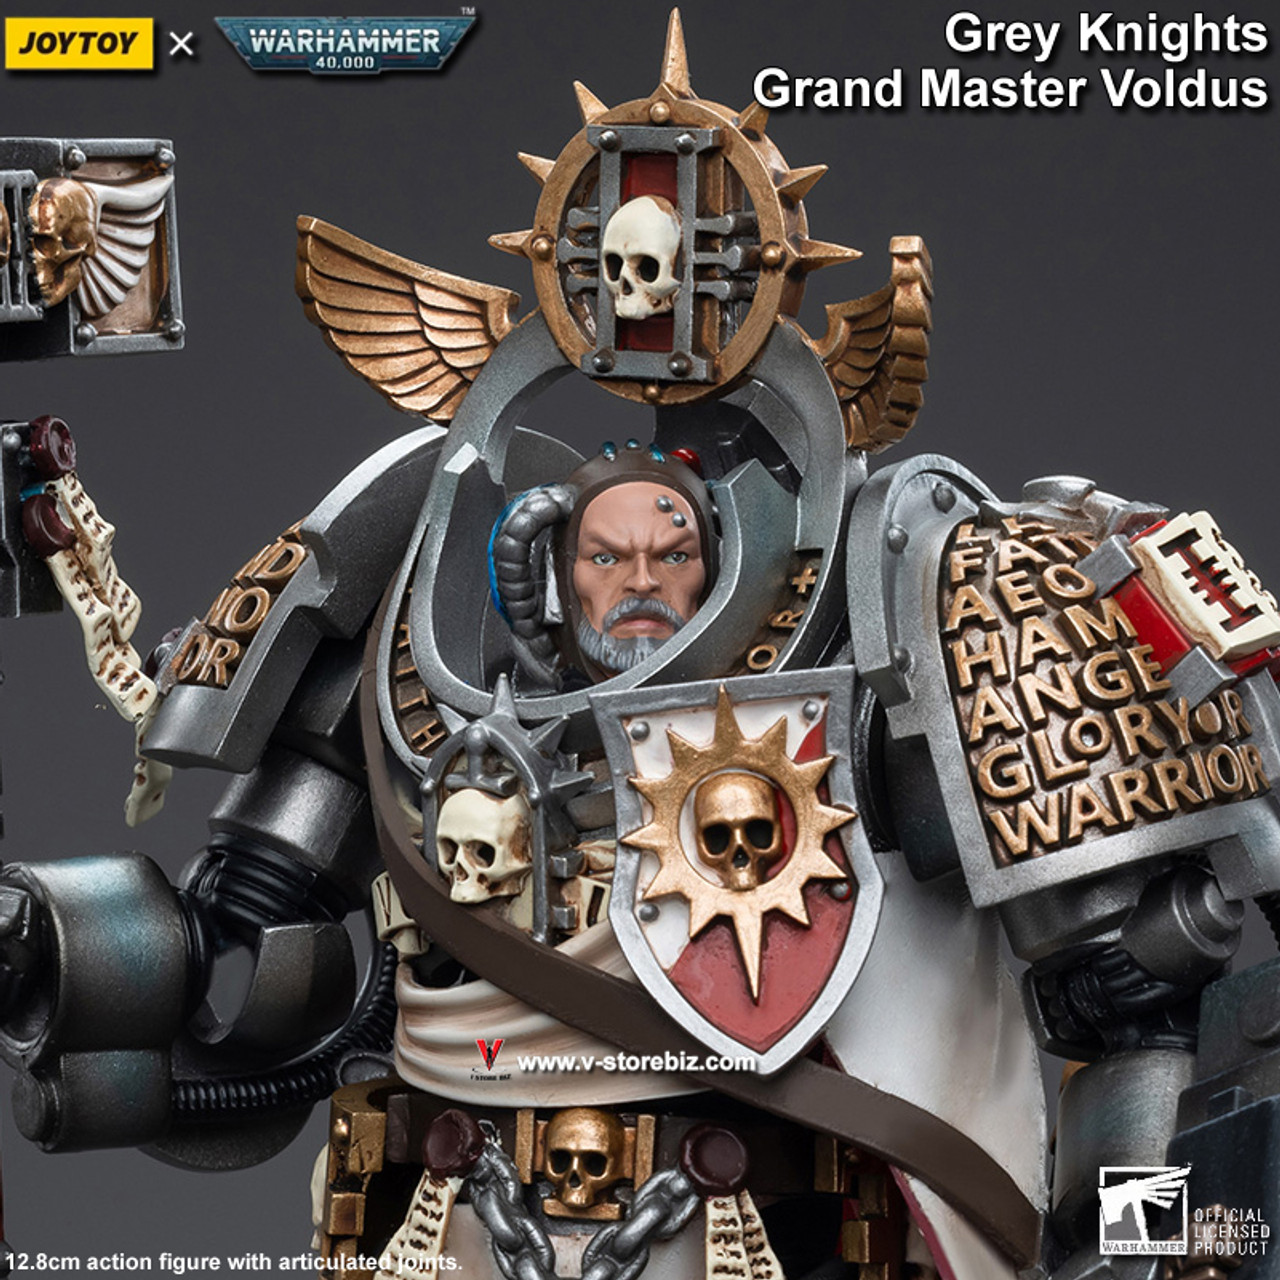 New JOYTOY Castellan Crowe & Space Marines!New JOYTOY action figures have  been spotted, including Grey Knights Castellan C…